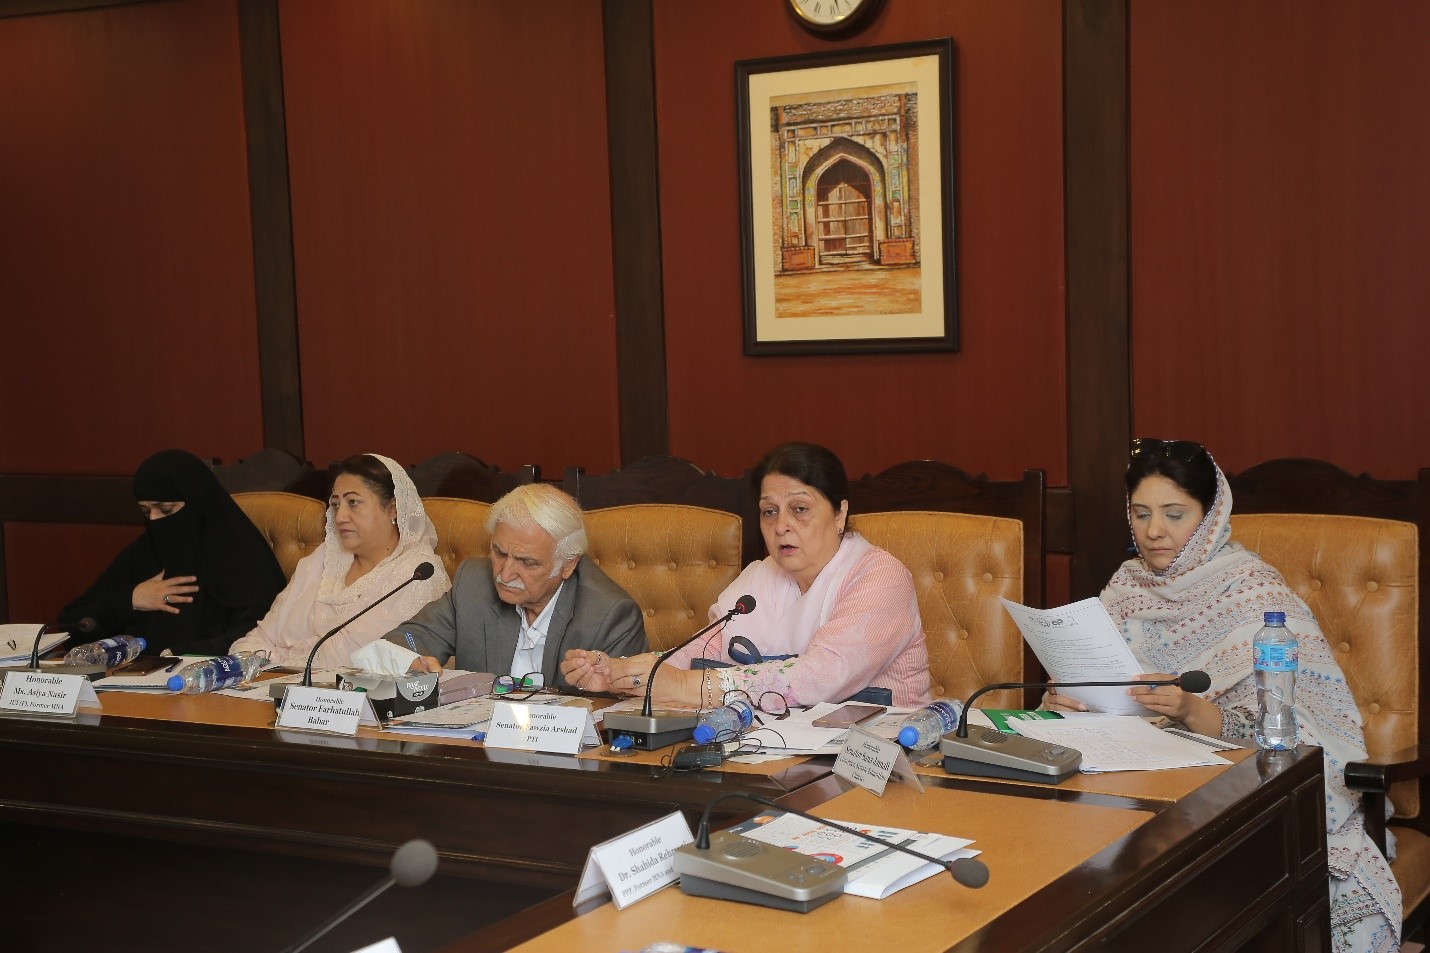 Roundtable Discussion on Education Reforms and Inclusion in Pakistan